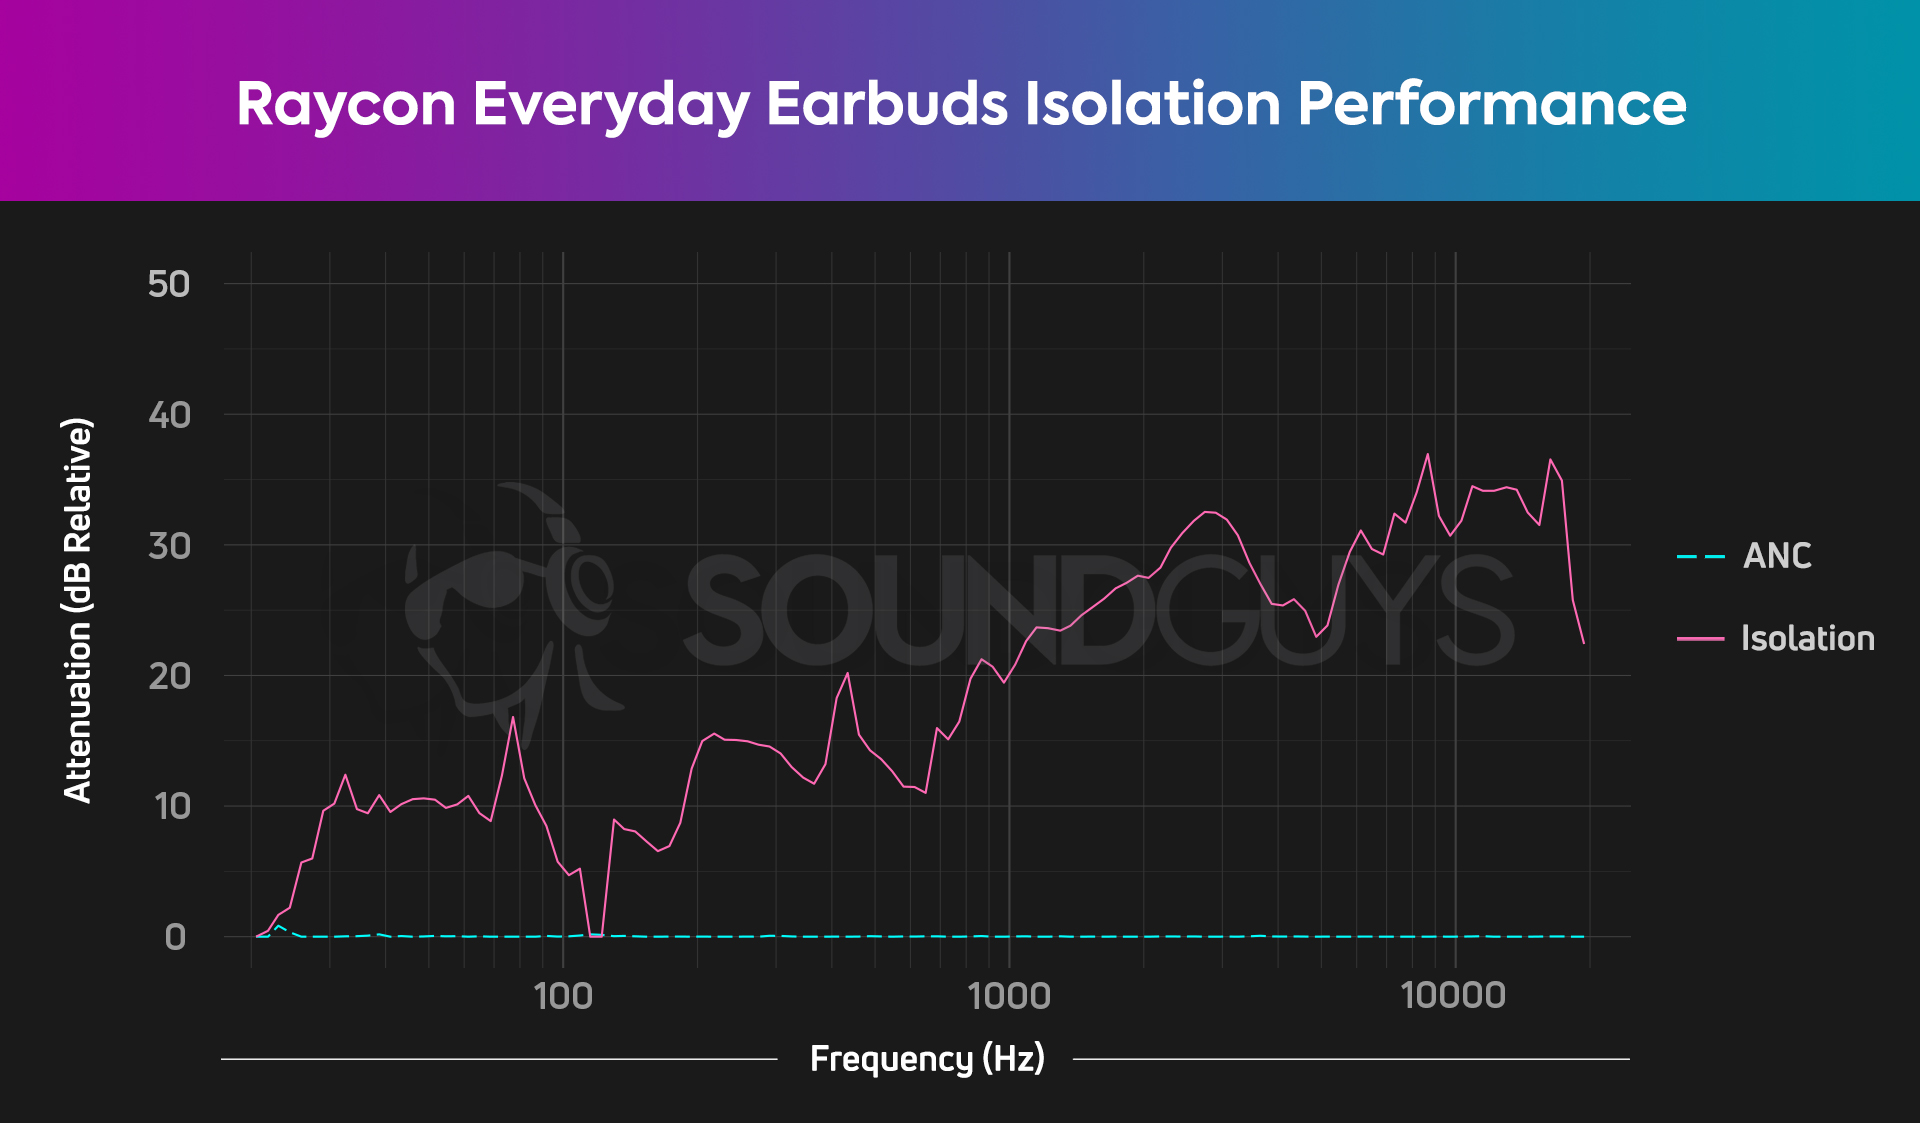 An isolation chart for the Raycon Everyday Earbuds, which shows a moderate level of attenuation across the frequency spectrum